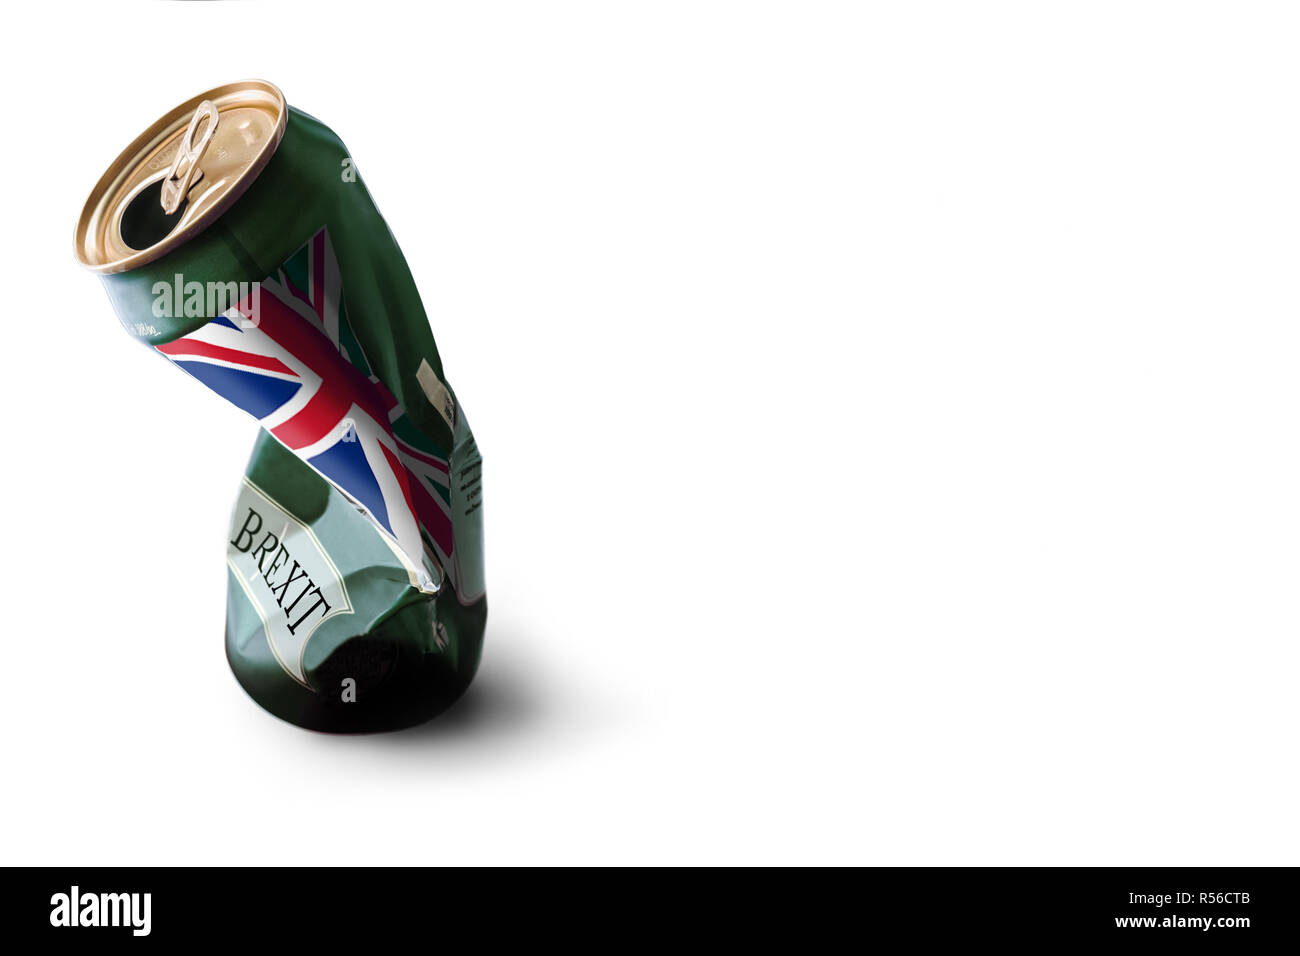 A beer can (invented), emptied and crushed. On the can is written 'Brexit' and the UK flag is printed on that can. Stock Photo